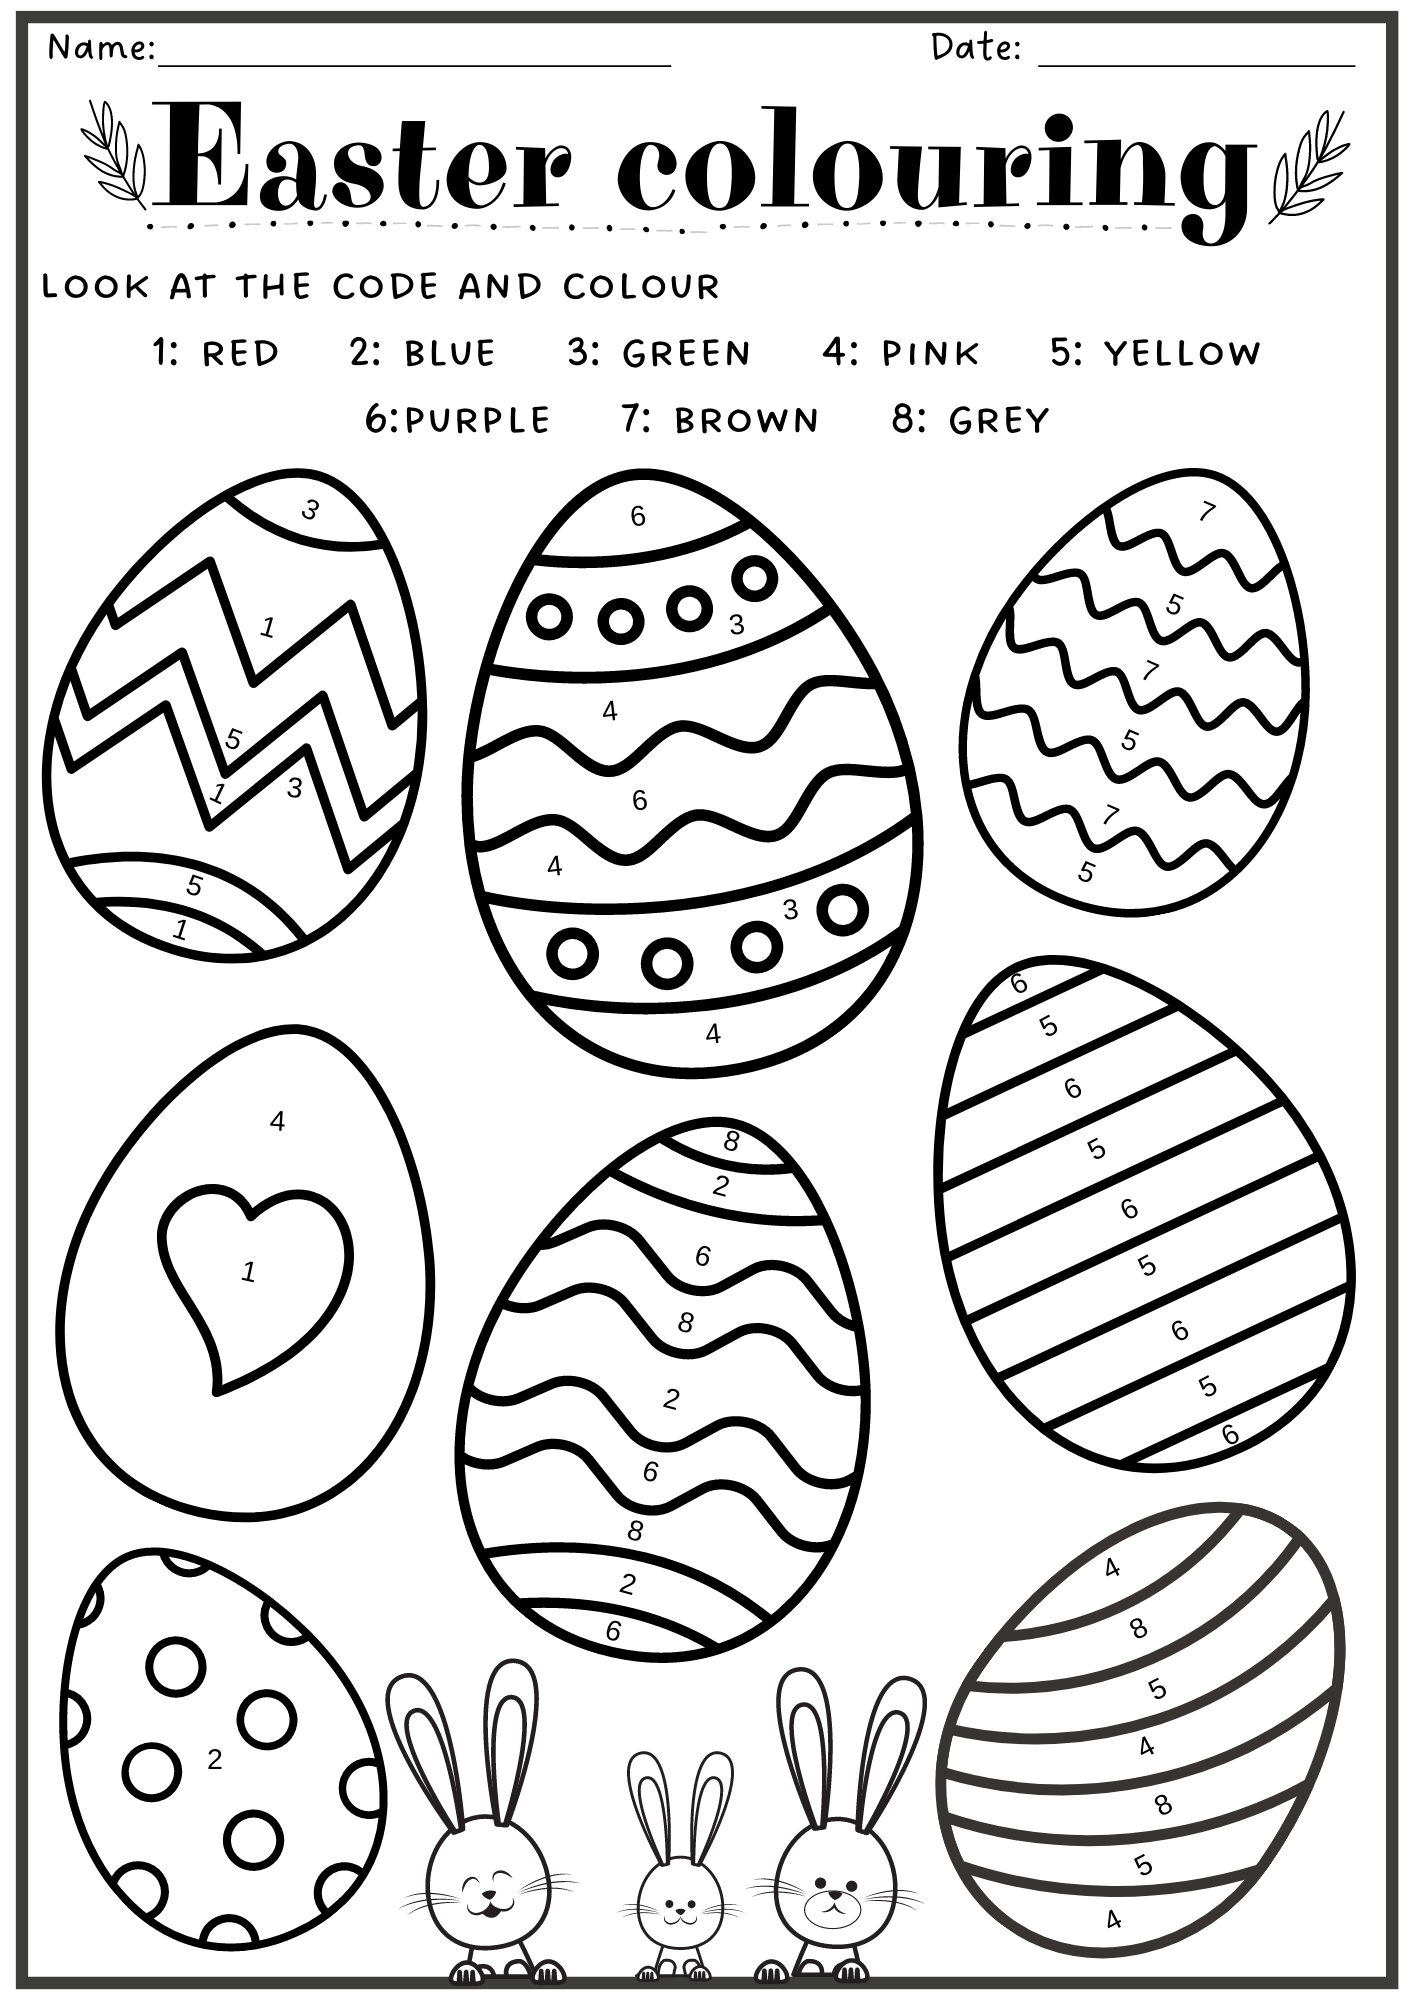 Black and white Easter coloring page worksheet